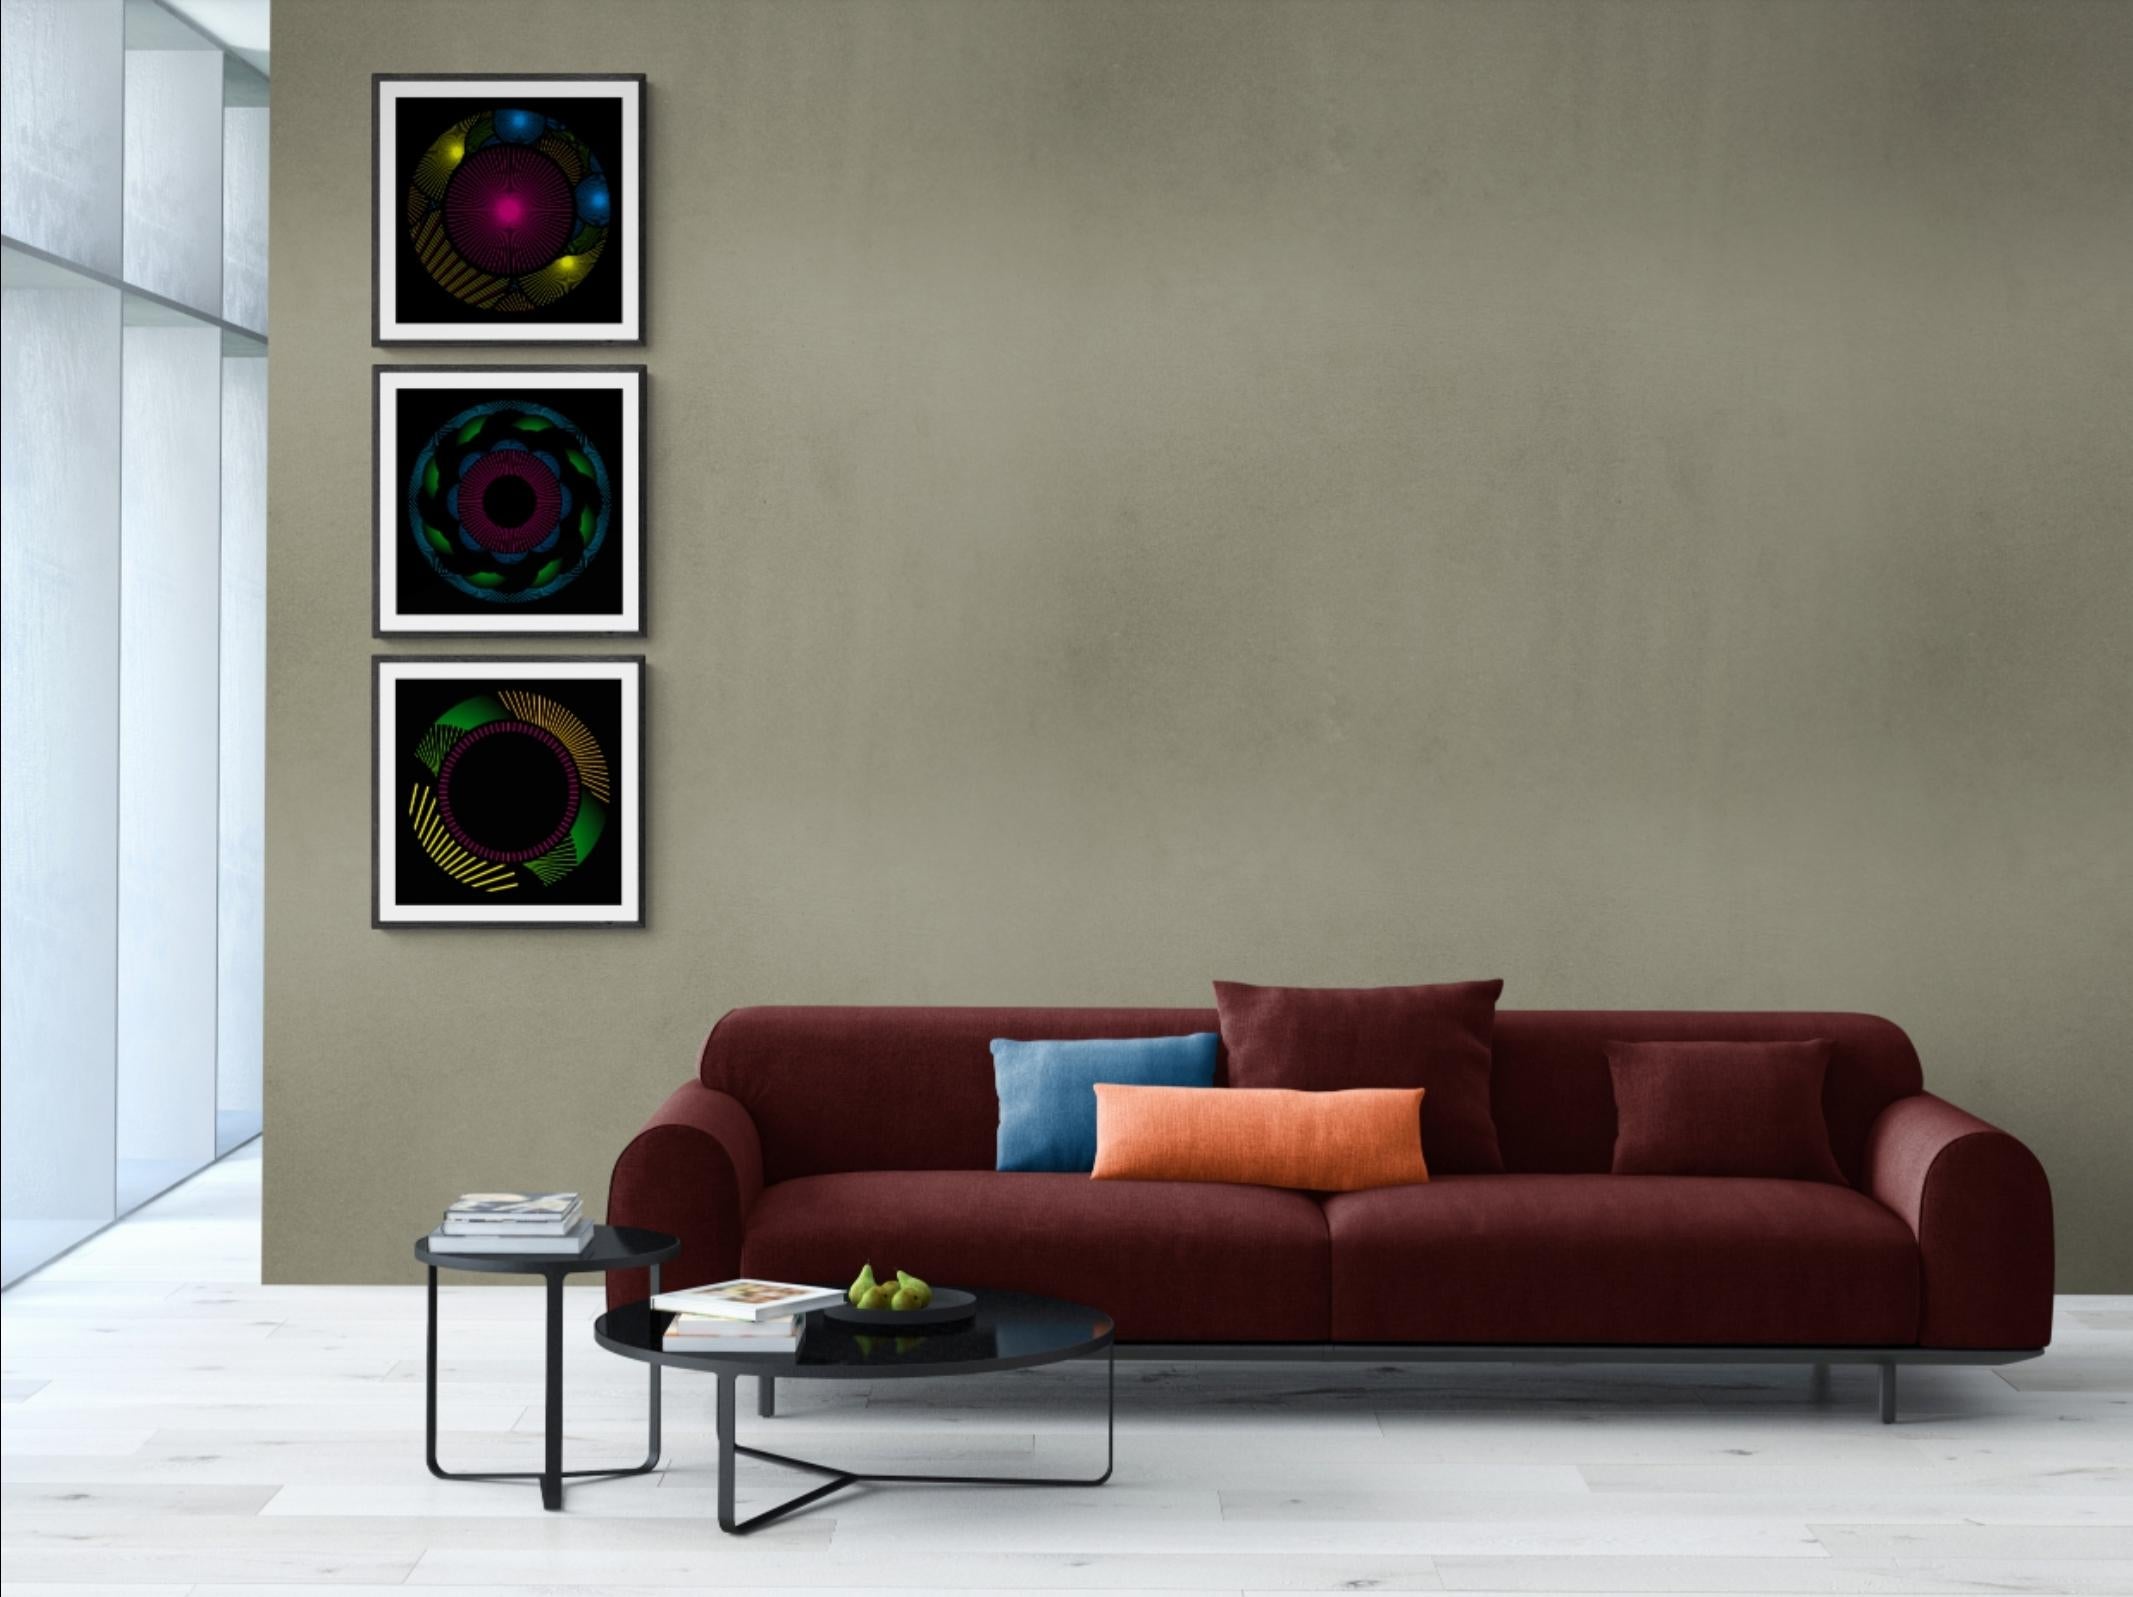 Nebulosa 6 - Black Abstract Print by Julio Campos